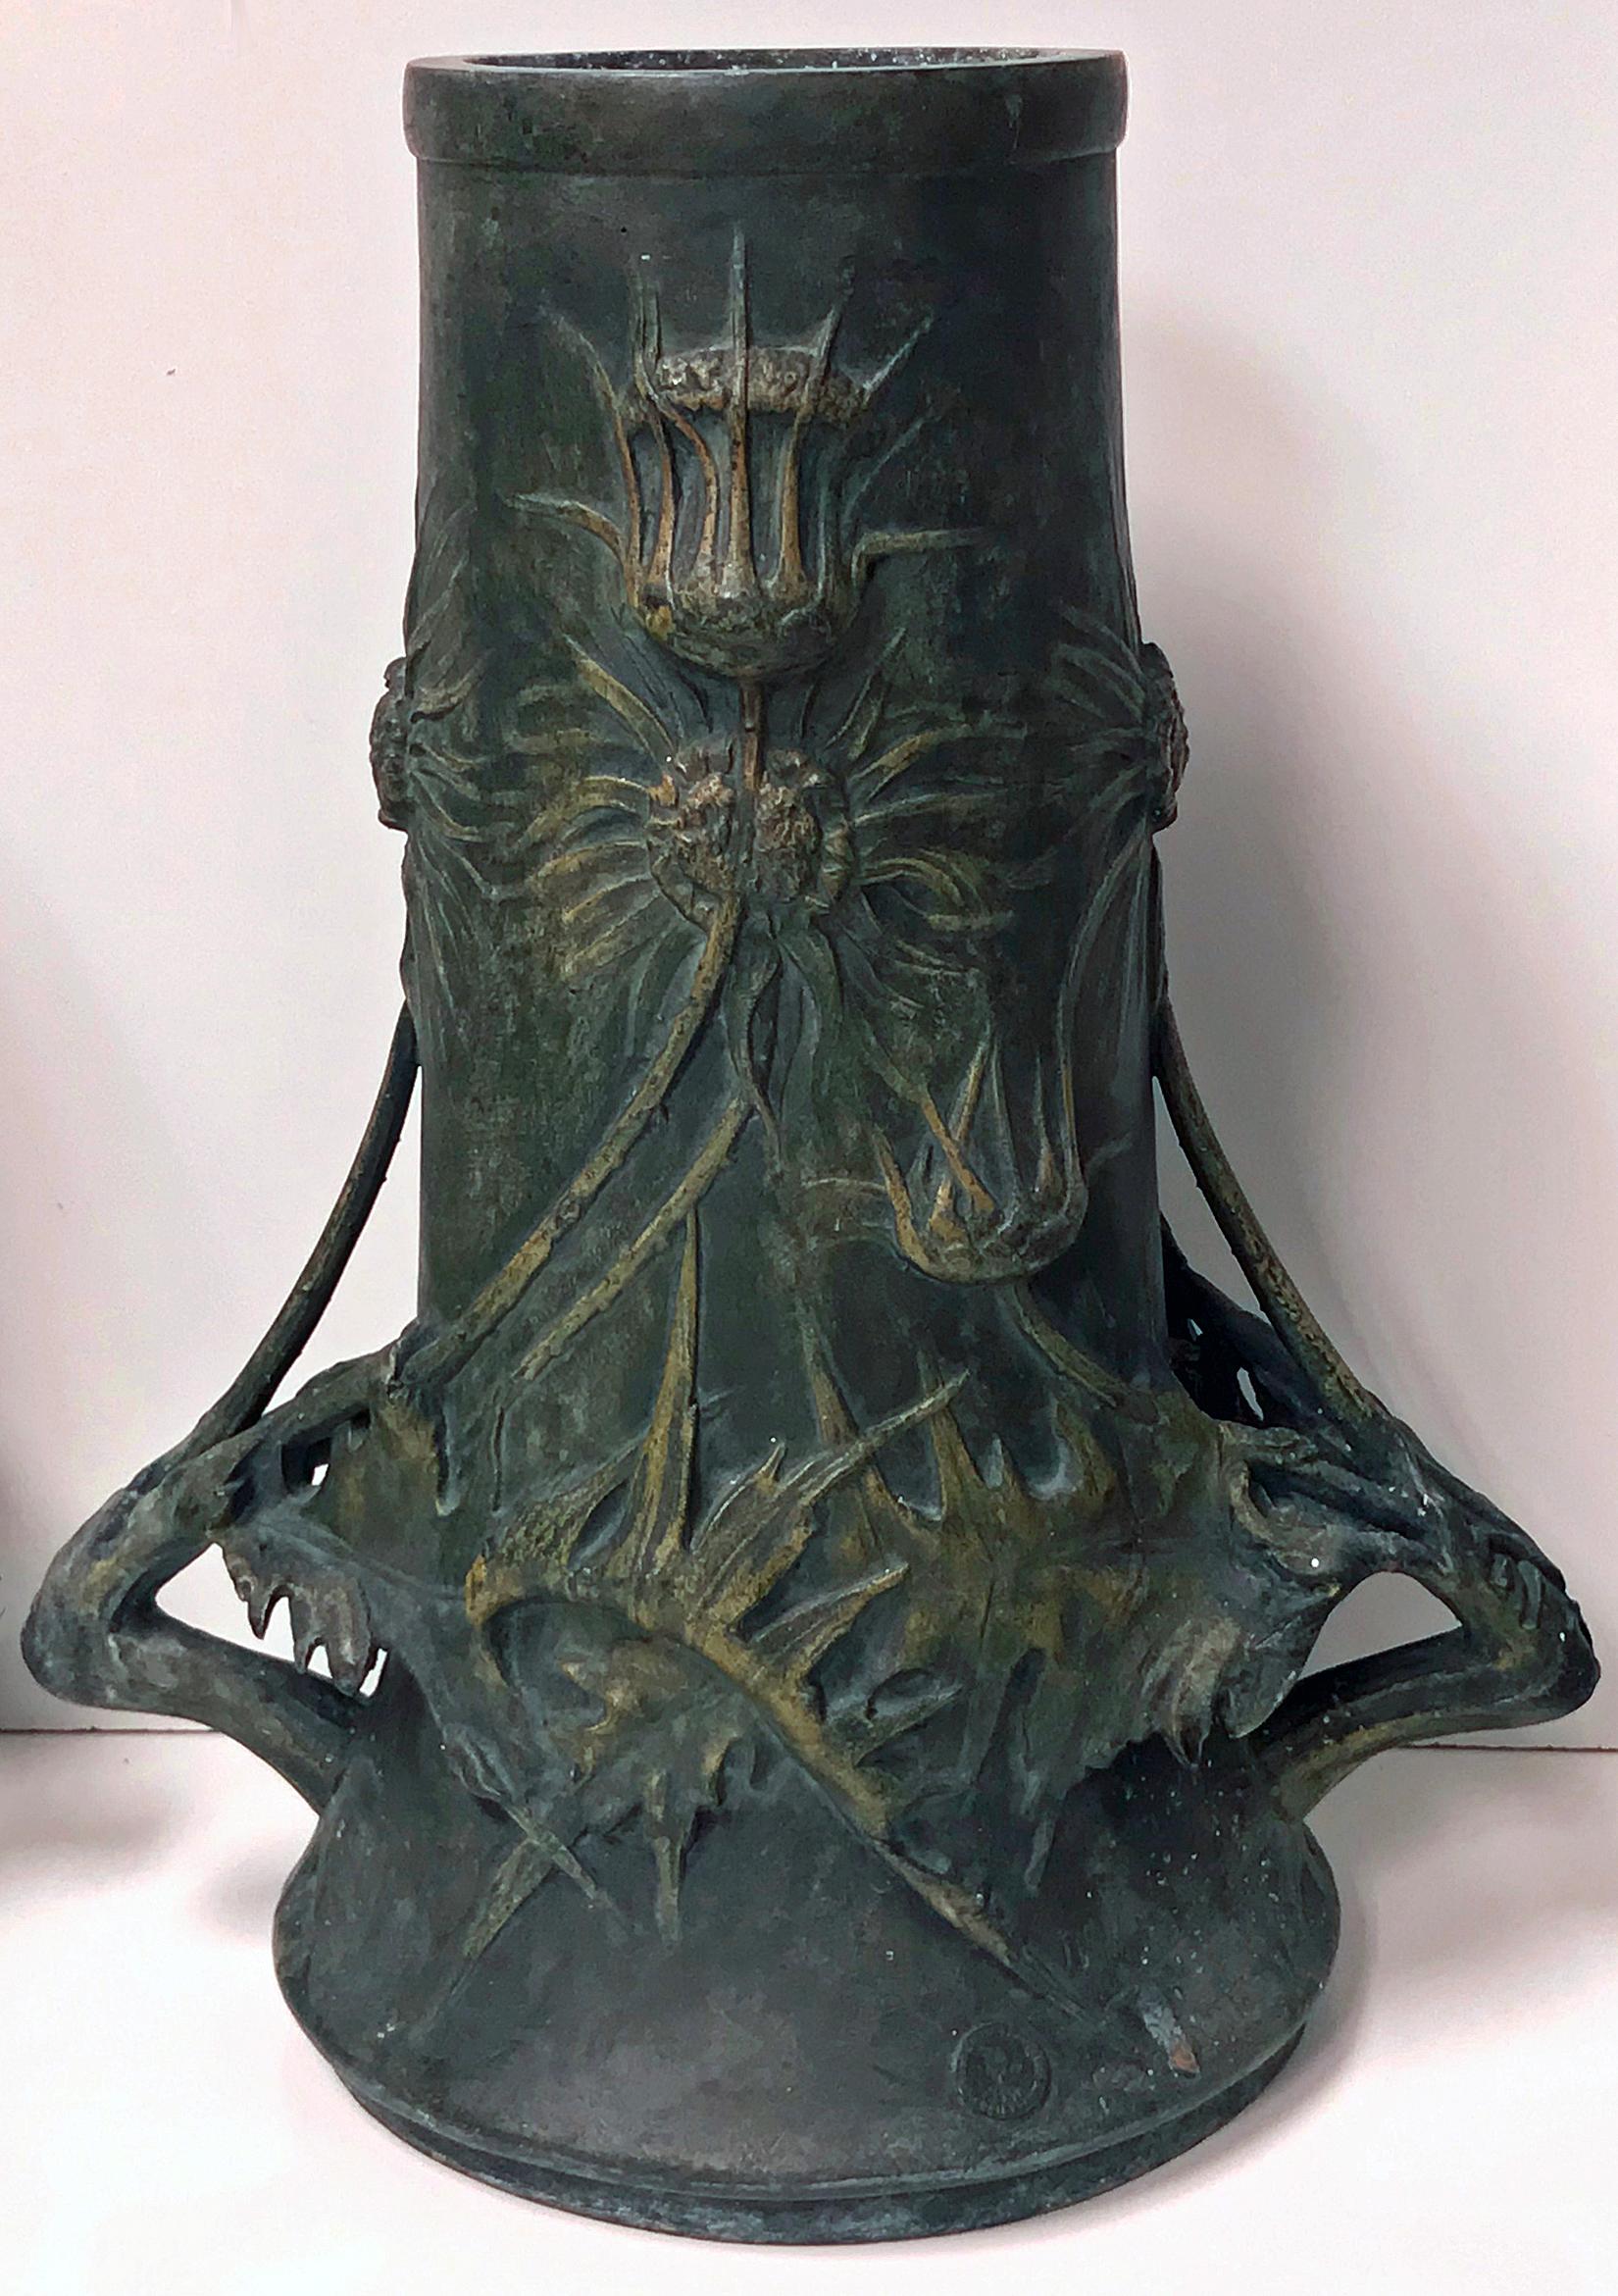 Pair of Art Nouveau vases, Blanche Poccard de Saintilau, French, circa 1900. Greenish patina bronzed surface in spelter metal, three dimensional thistle decorations; the handles conforming as thistle branches. They are signed along the edge alon